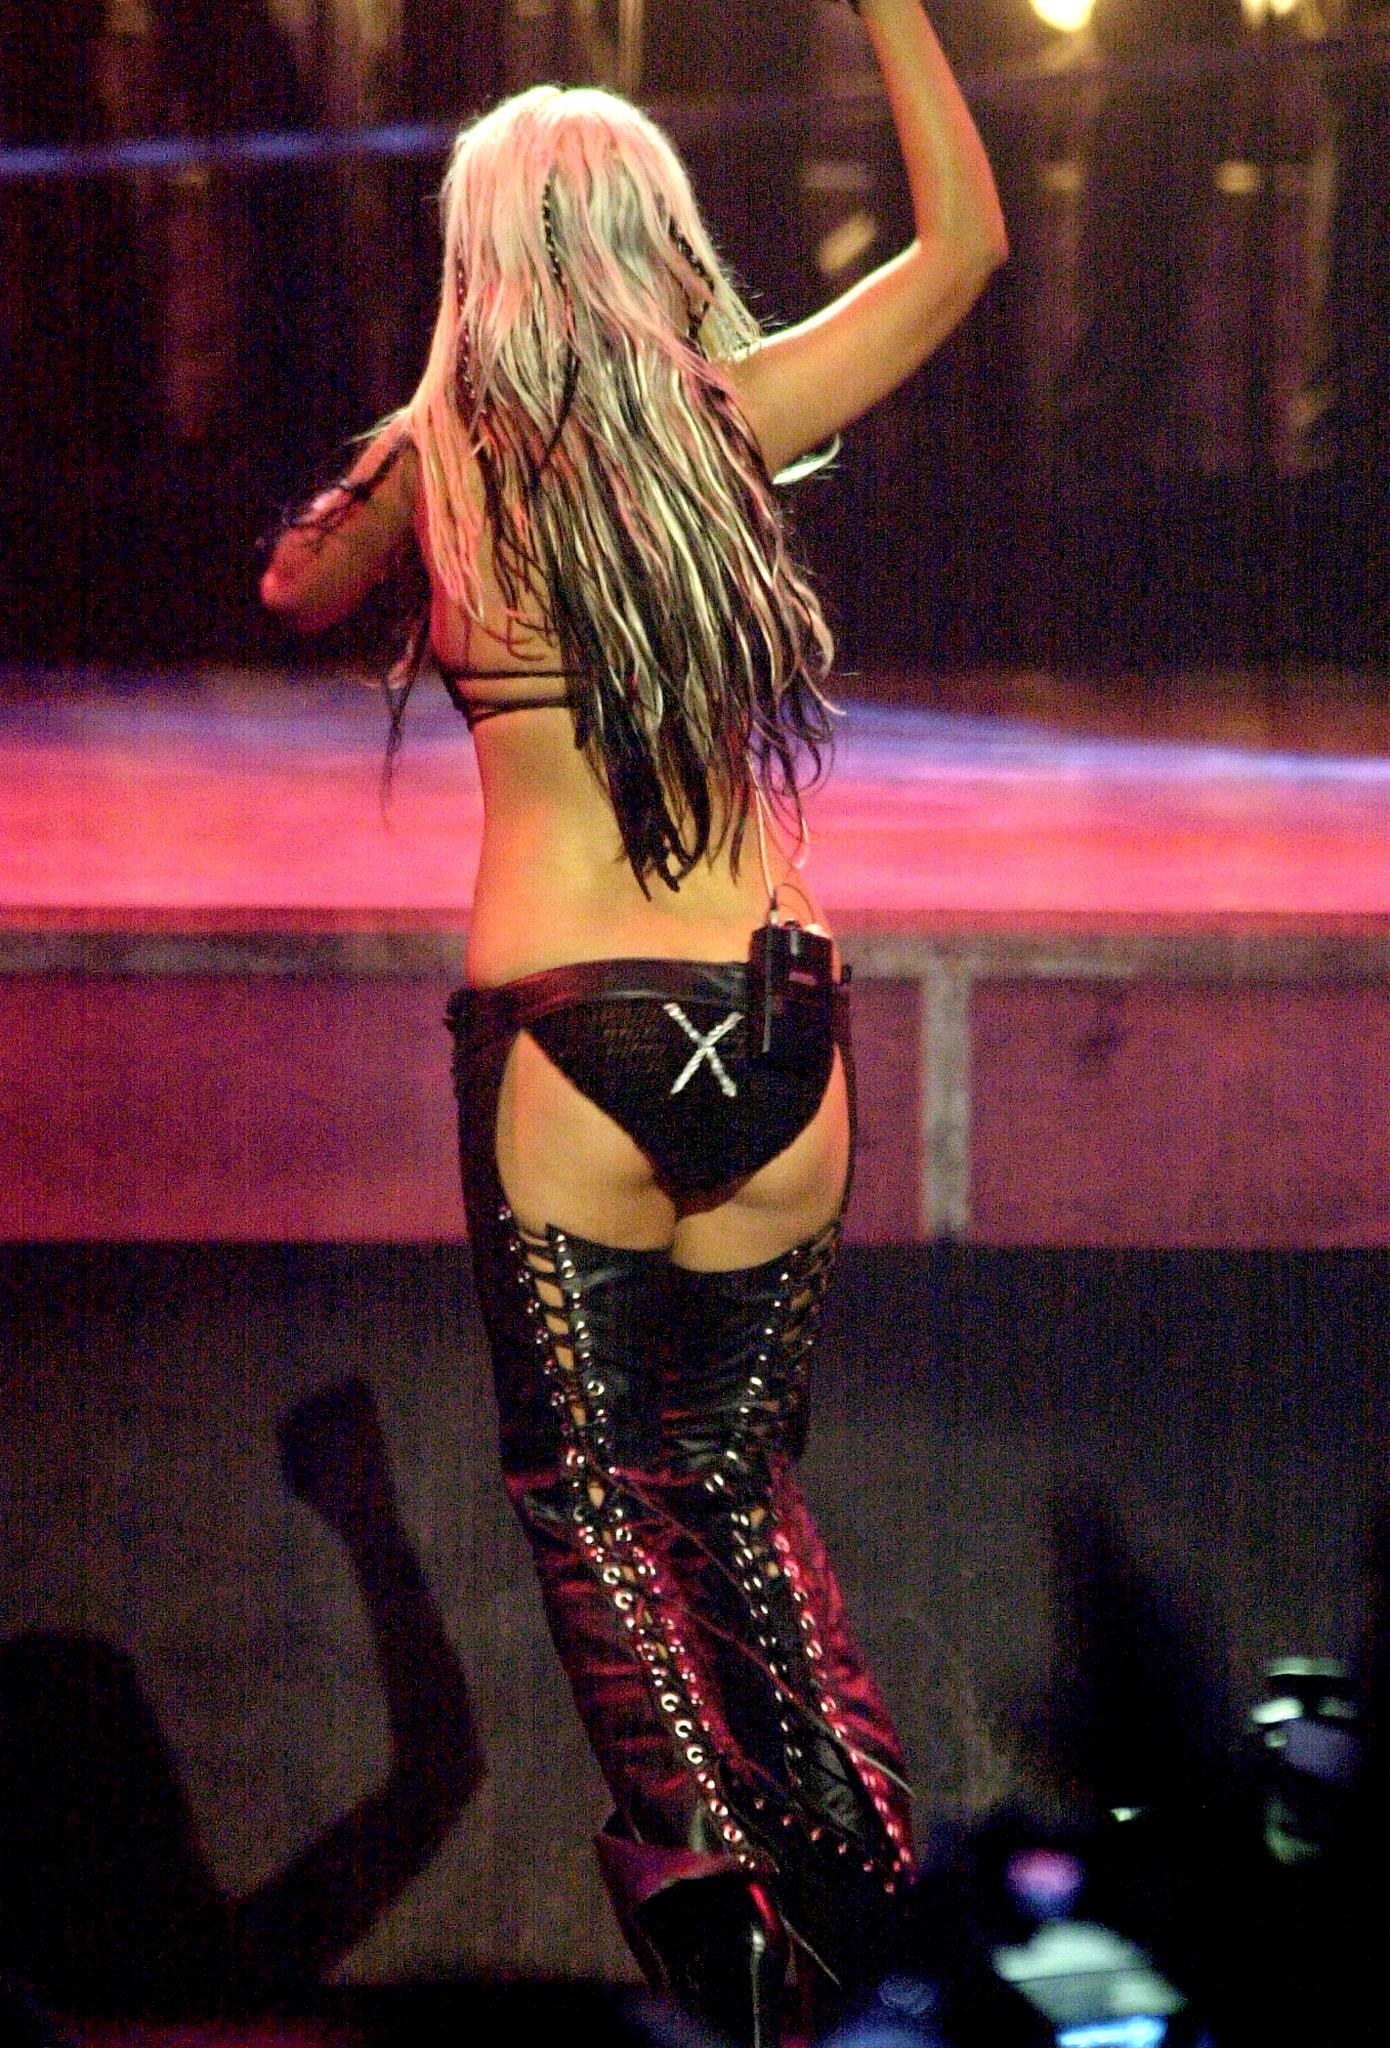 Christina onstage wearing black leather chaps